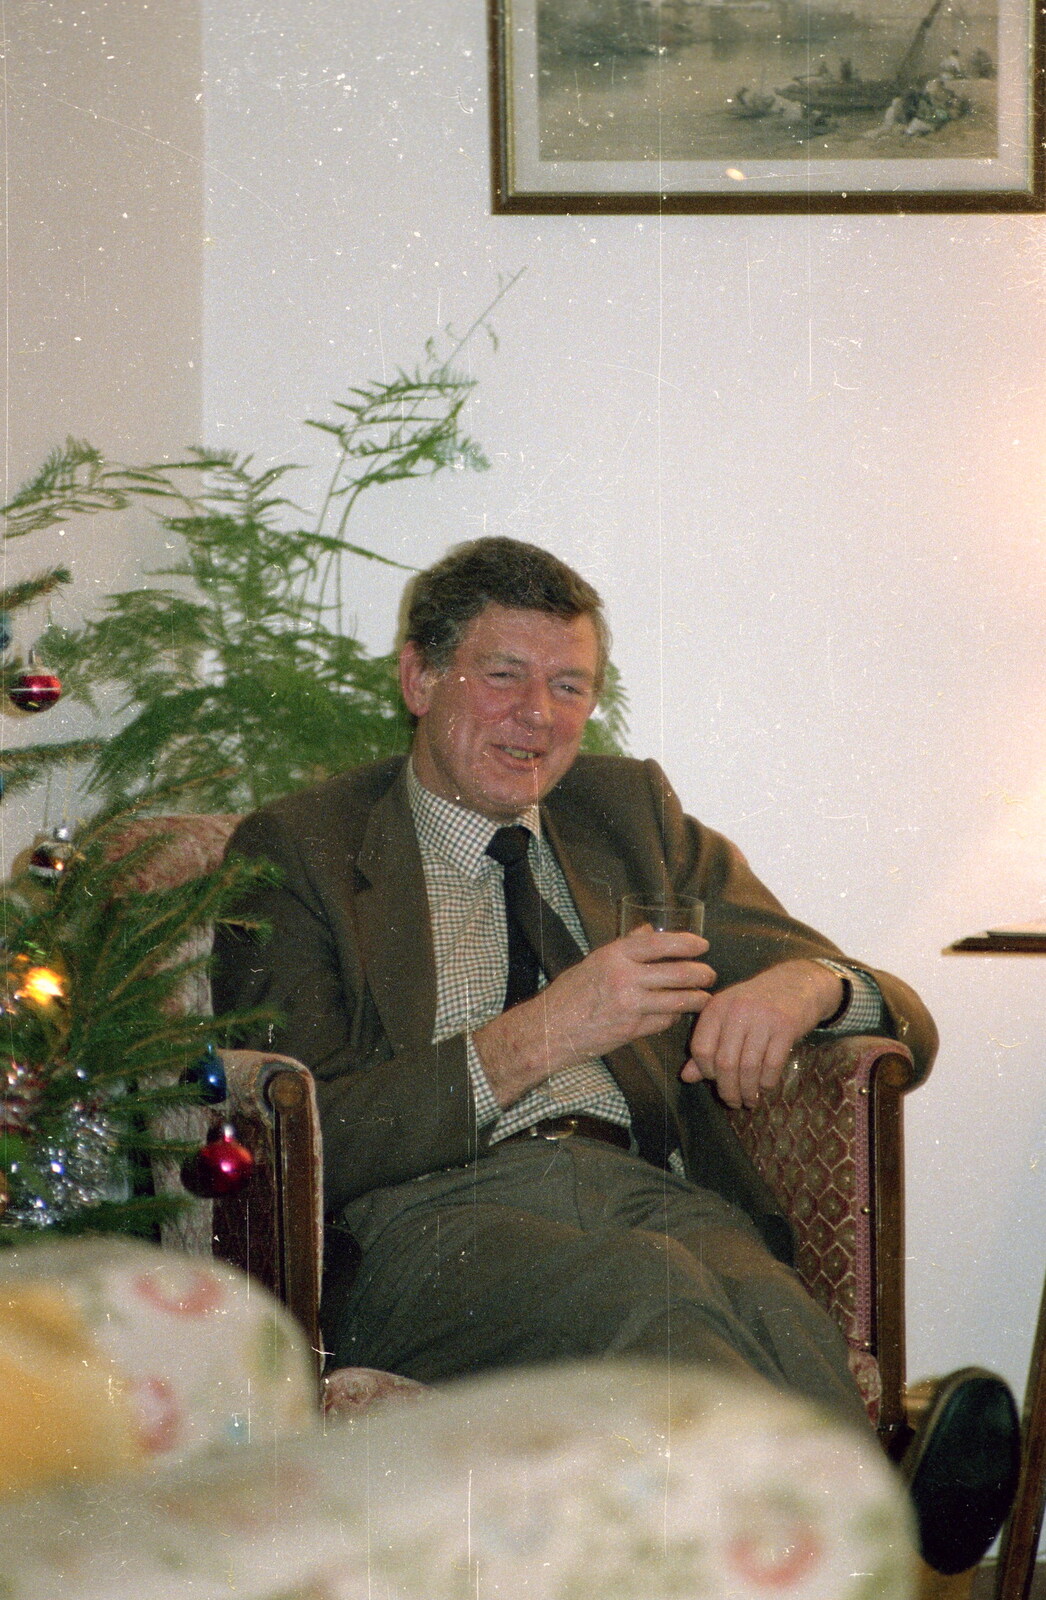 Brian has a drink from New Year's Eve at Anna's, Walkford, Dorset - 31st December 1985